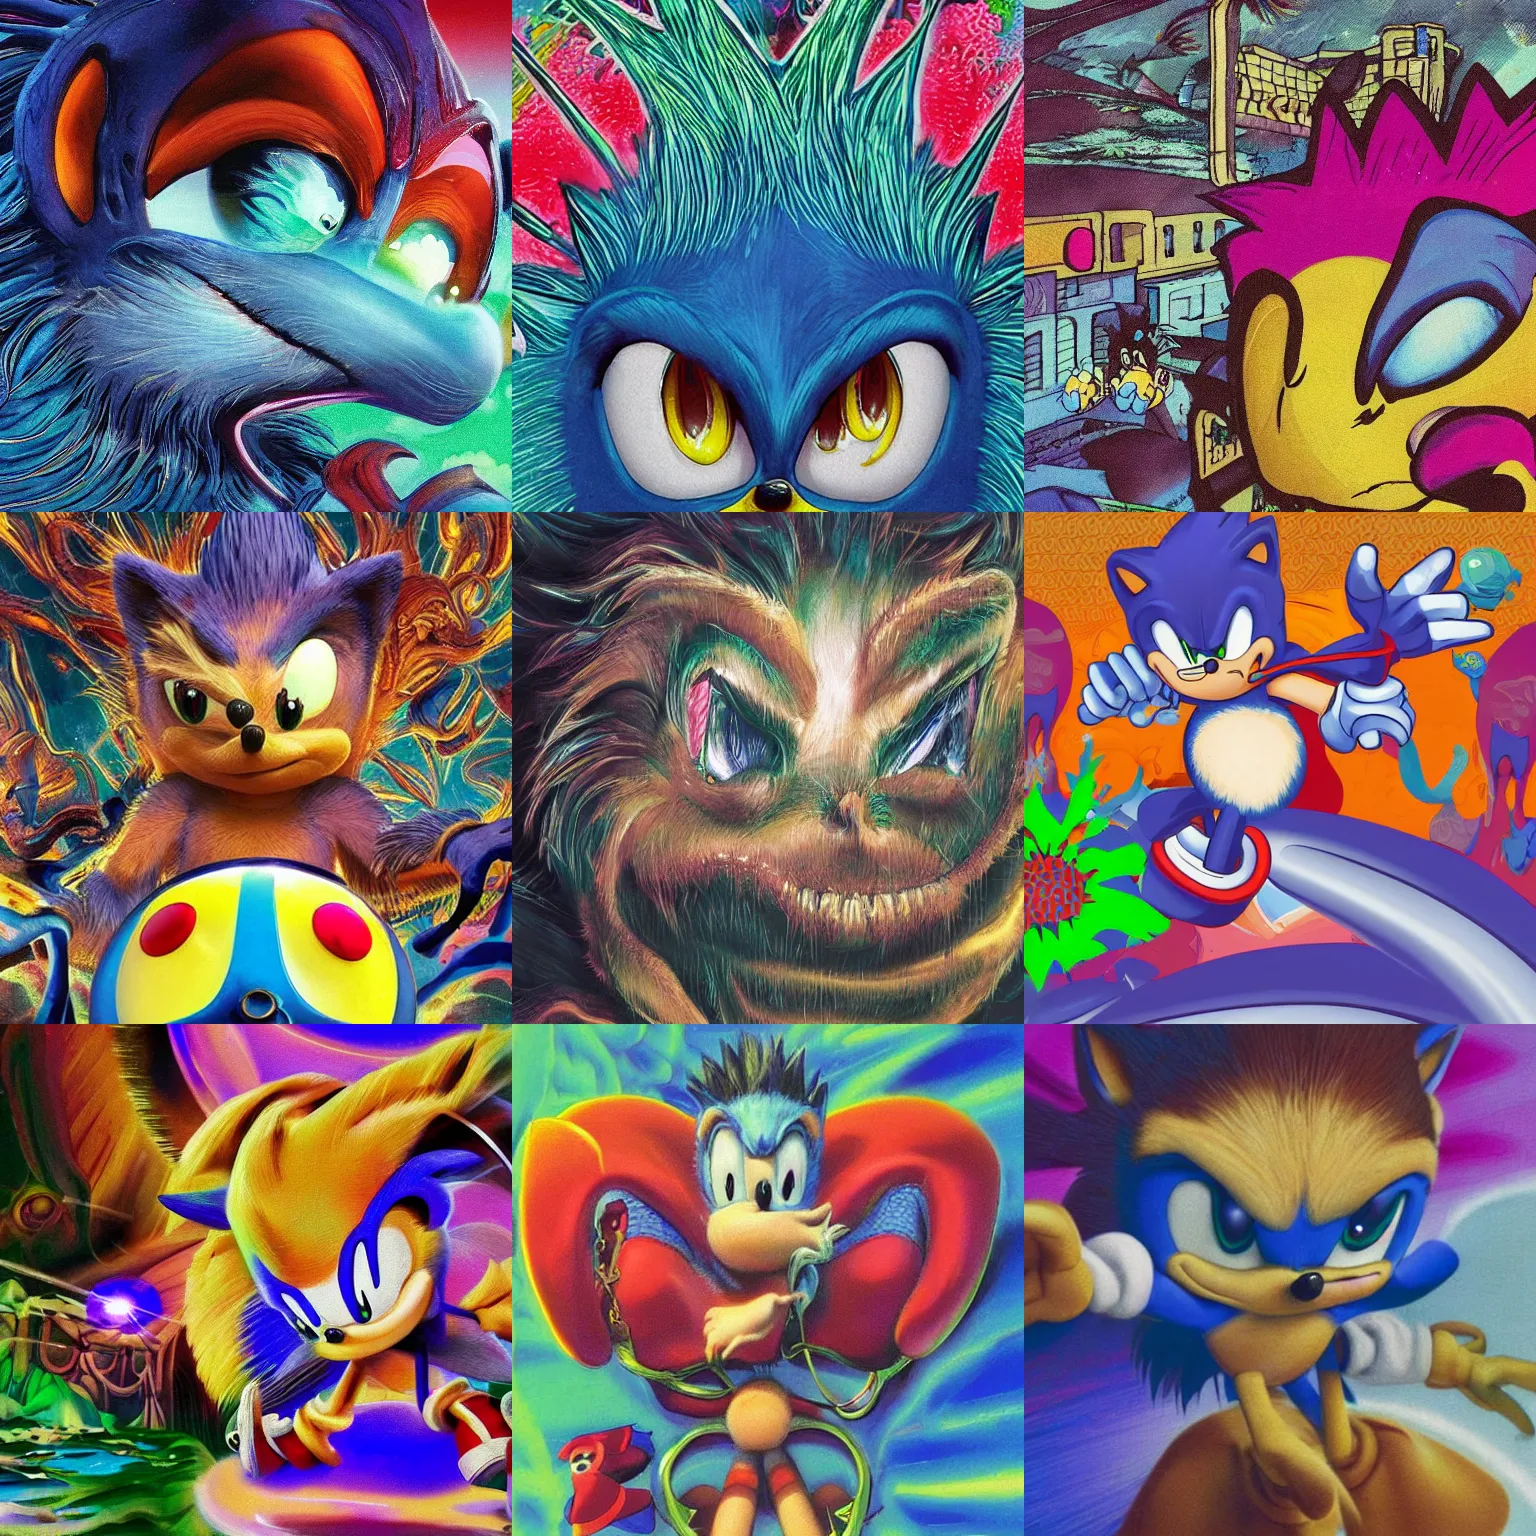 Prompt: close up sonic the hedgehog in a surreal, soft, dripping, glossy, professional, high quality airbrush art mgmt shpongle album cover of a chrome dissolving LSD DMT blue sonic the hedgehog surfing through vaporwave caves, checkerboard horizon , 1980s 1982 Sega Genesis video game album cover